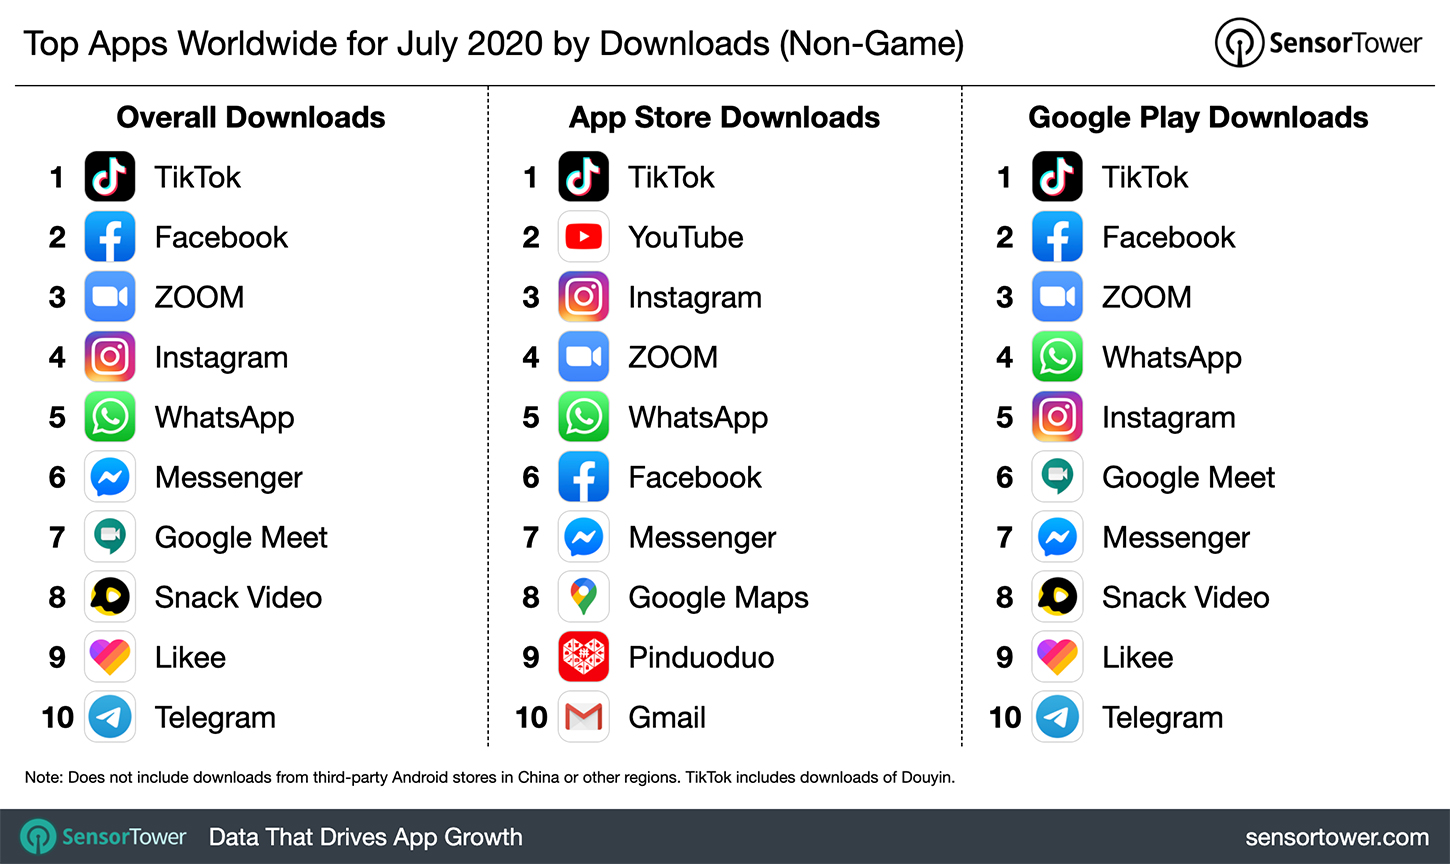 Top Apps Worldwide for July 2020 by Downloads